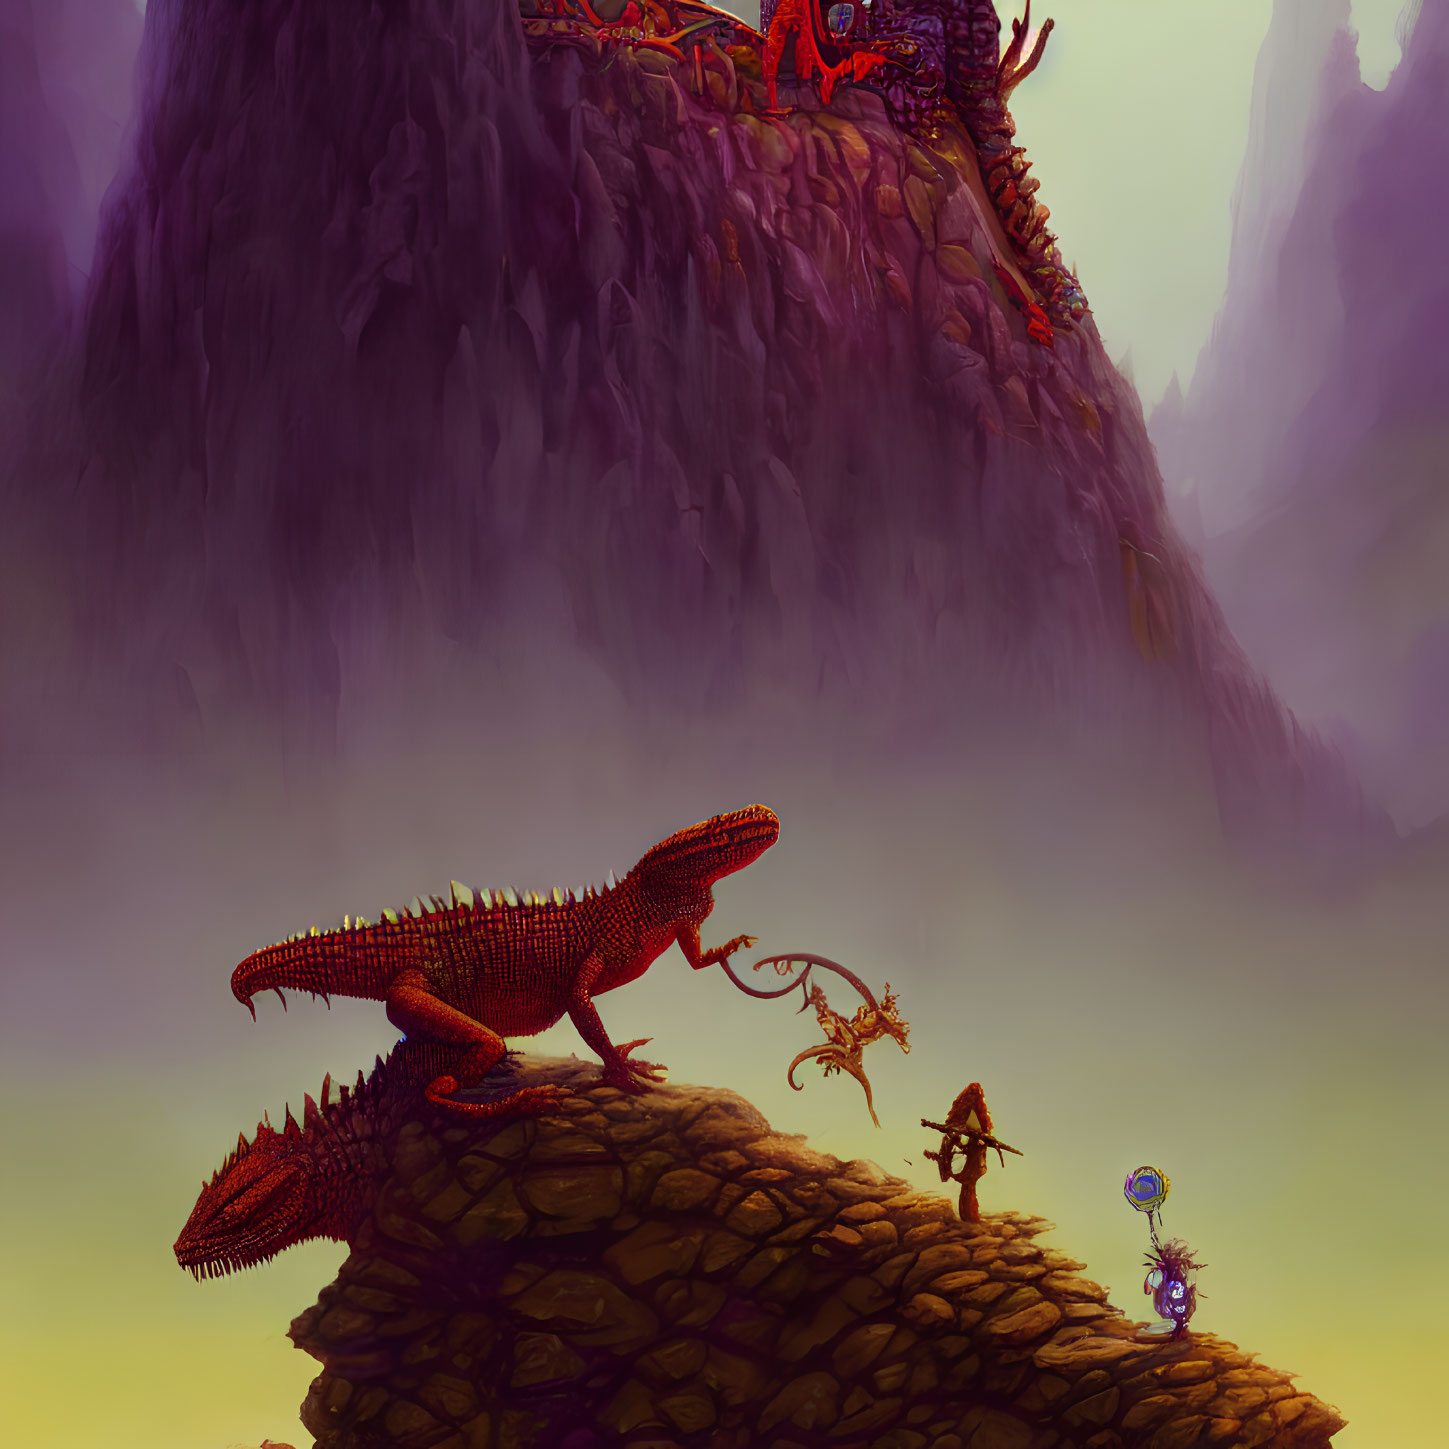 Fantasy illustration: red dragon, warrior with spear, whimsical creature, misty mountain backdrop